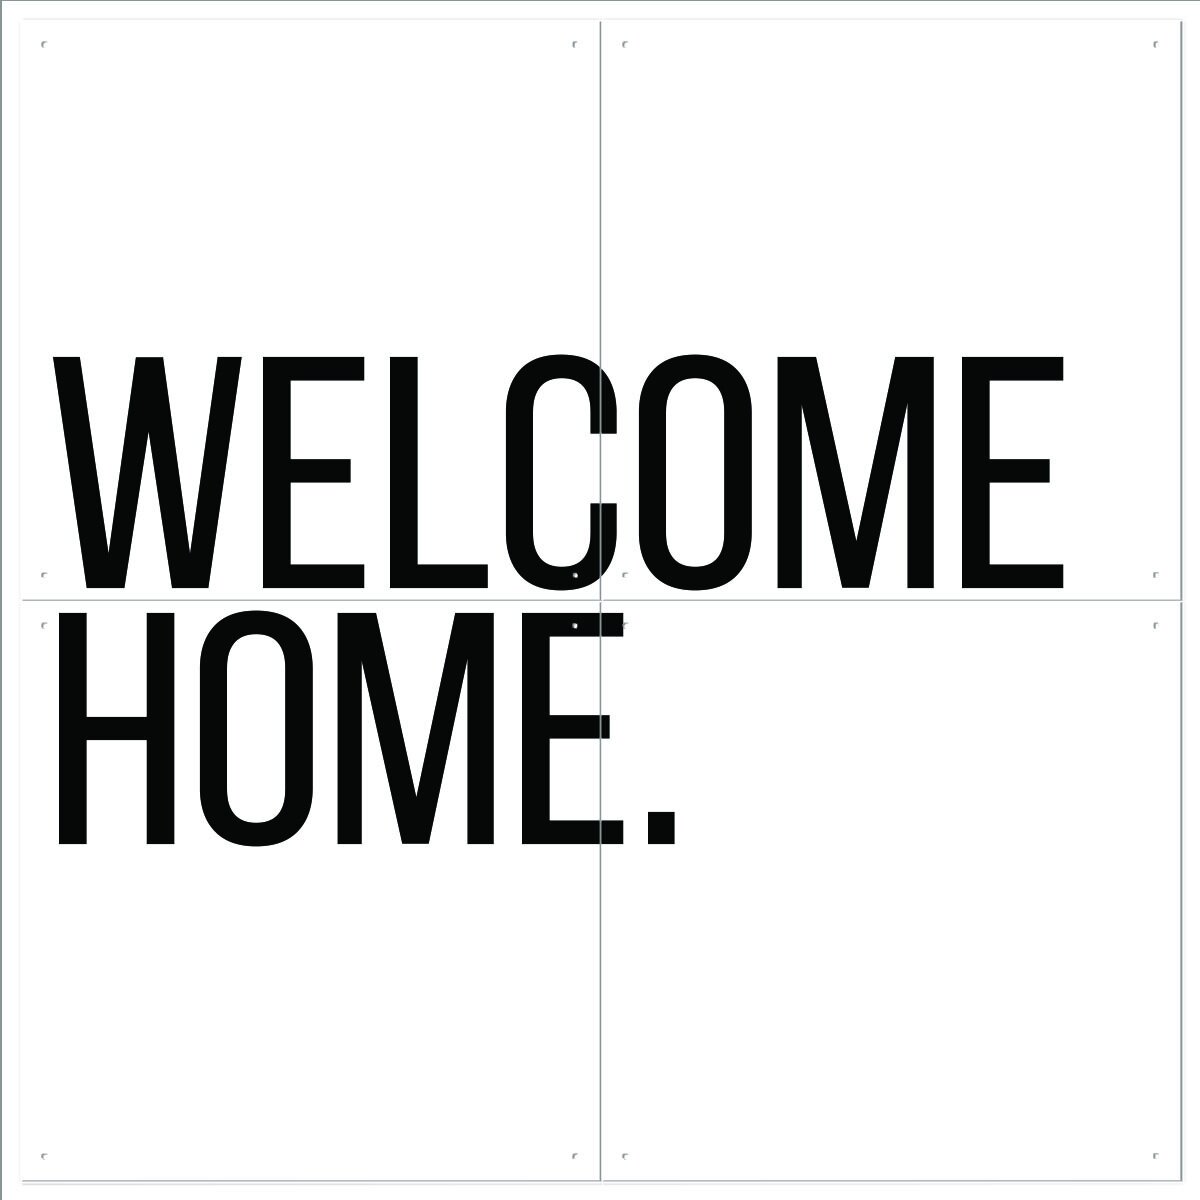 Free Vector  Welcome home background